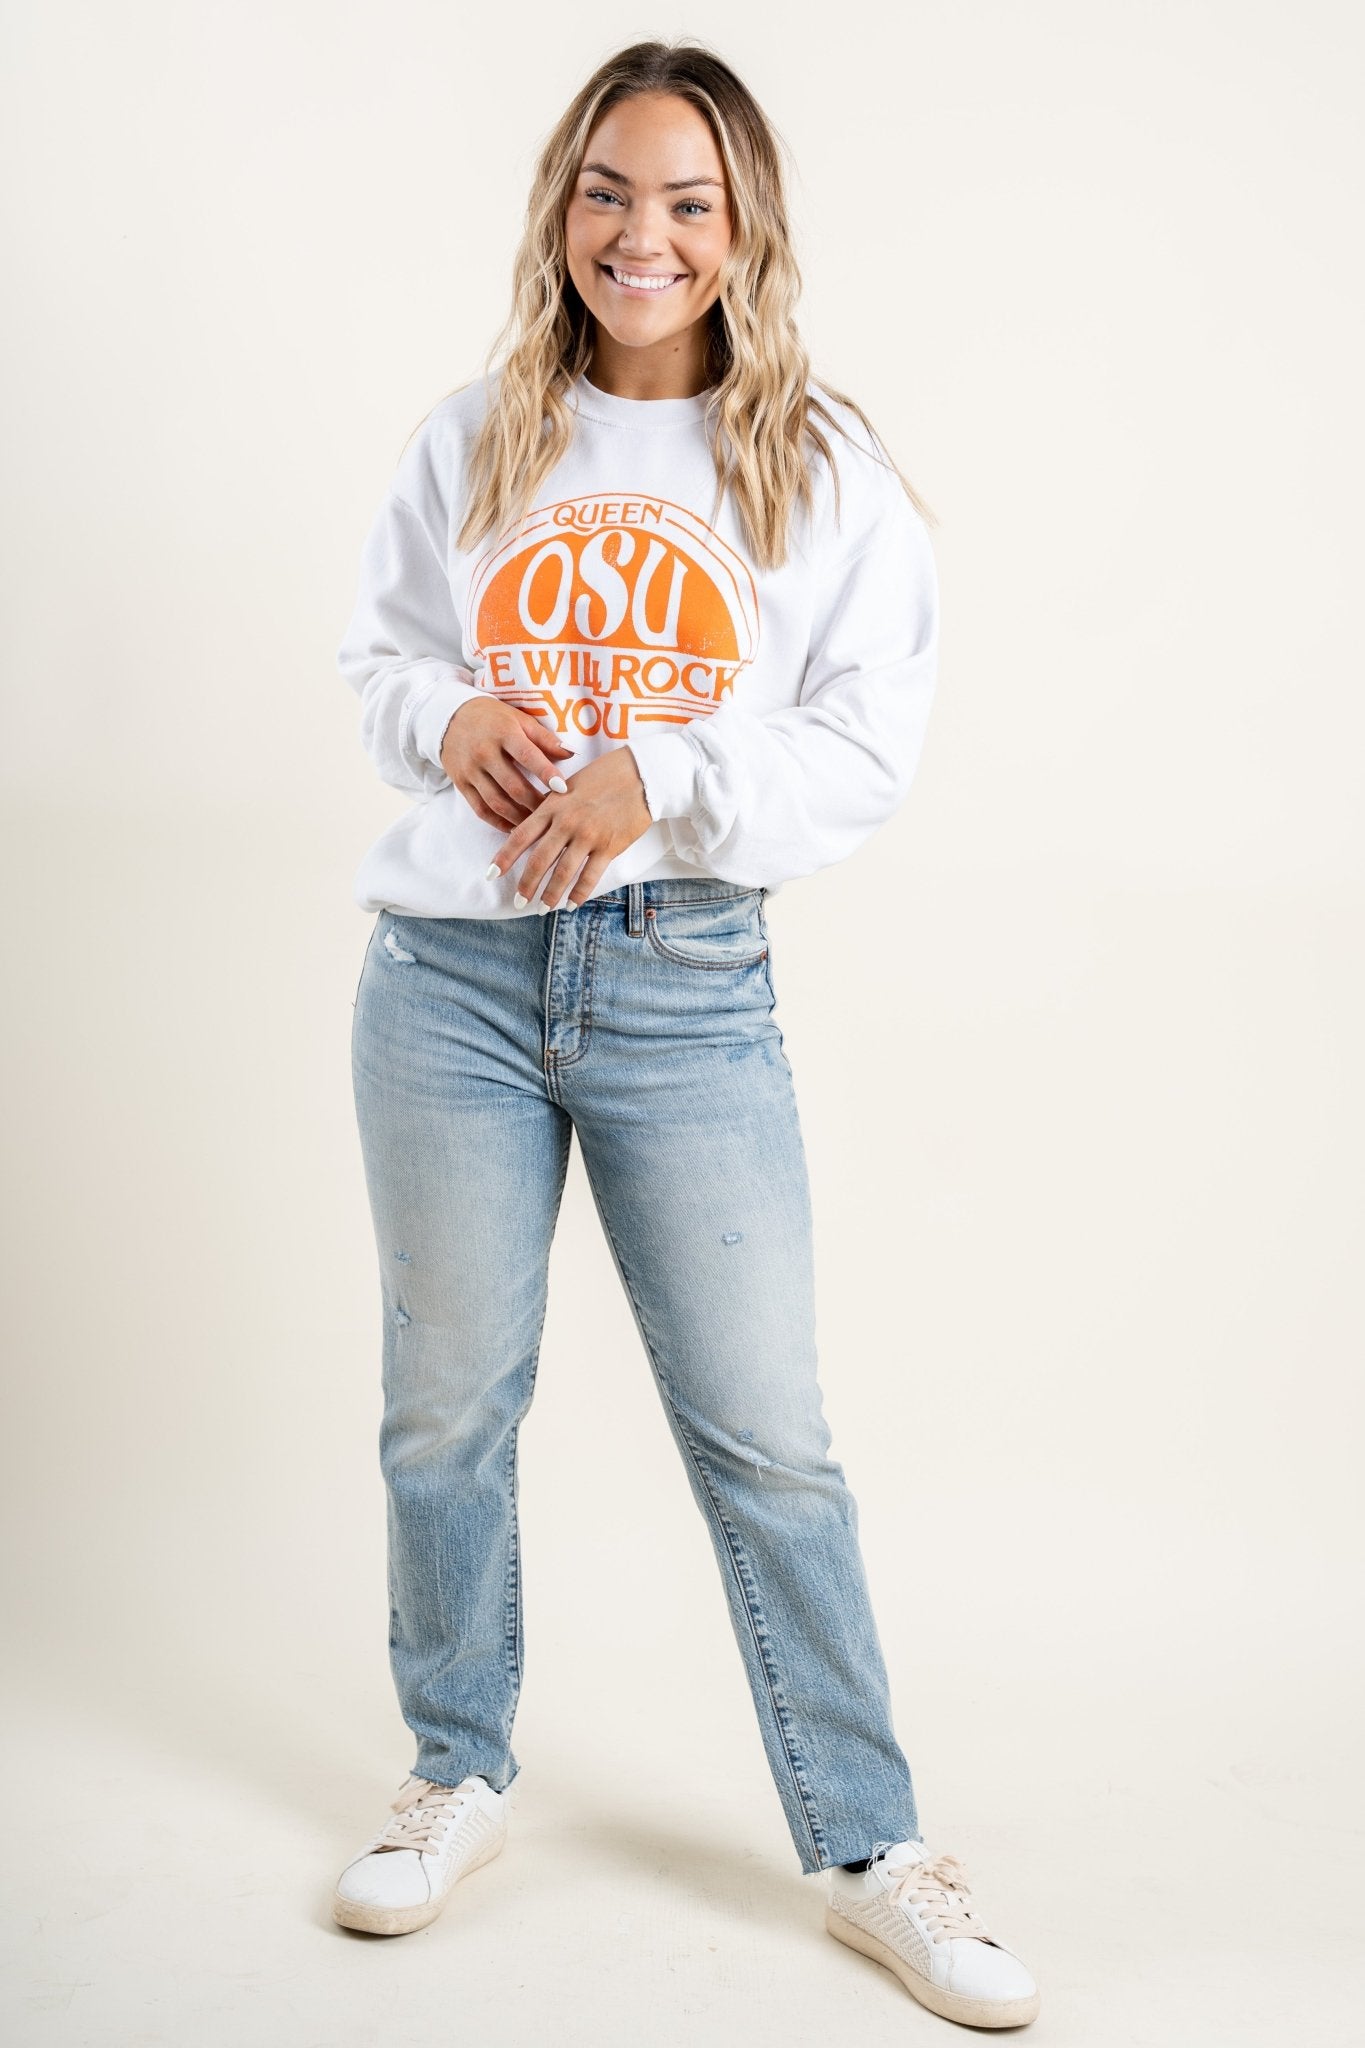 OSU Queen we will rock you sweatshirt white - Vintage Band T-Shirts and Sweatshirts at Lush Fashion Lounge Boutique in Oklahoma City